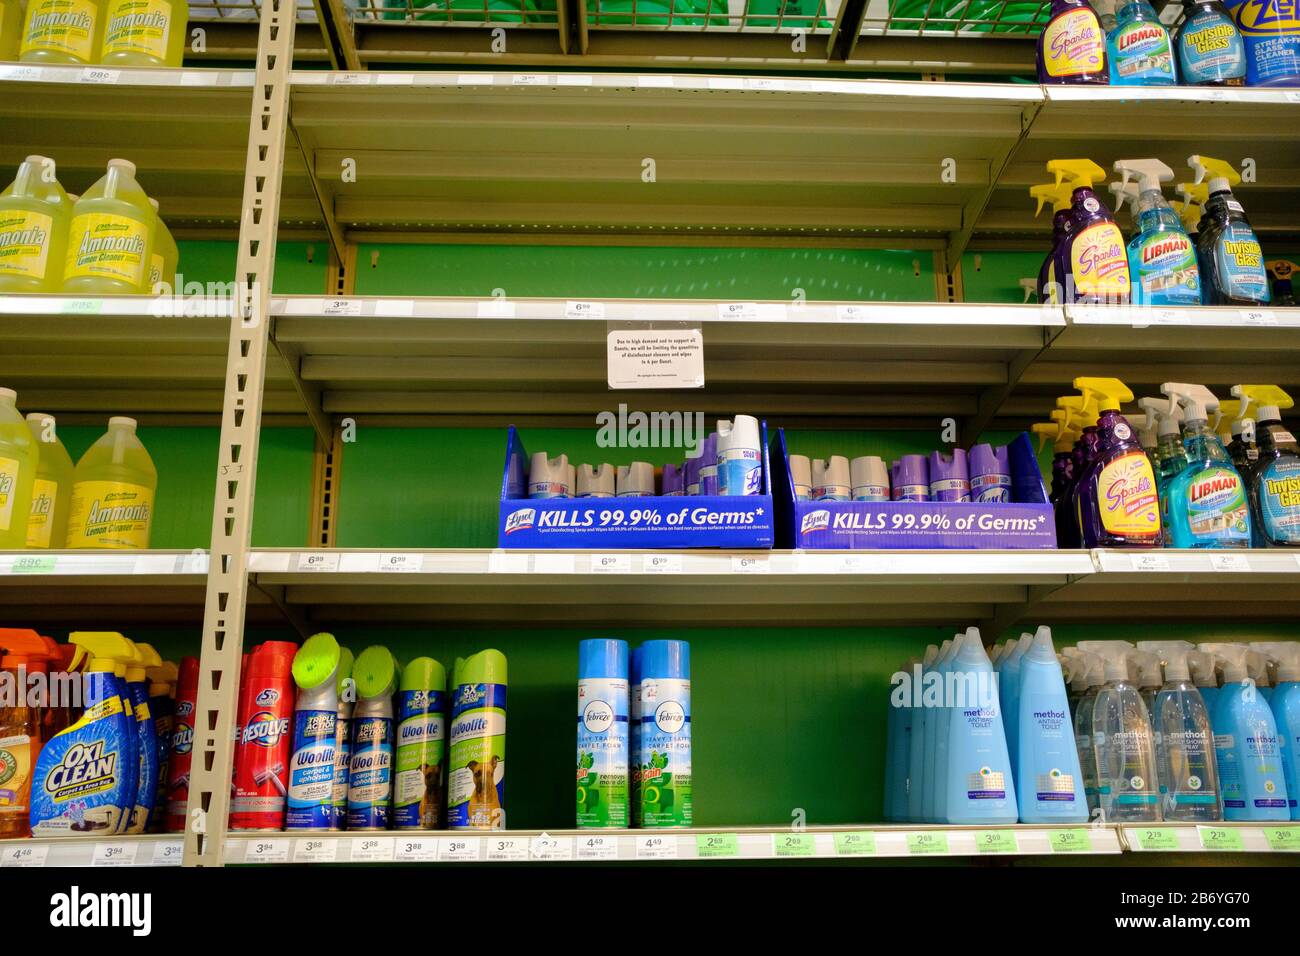 03112020 - Bloomington, Indiana, USA: A shelf of disinfectants is emptied at Menards on the day World Health Organization declared Coronavirus to be a pandemic. Toilet paper, wipes, protective breathing masks, and other items are either sold out at local stores, or are in short supply. Stock Photo